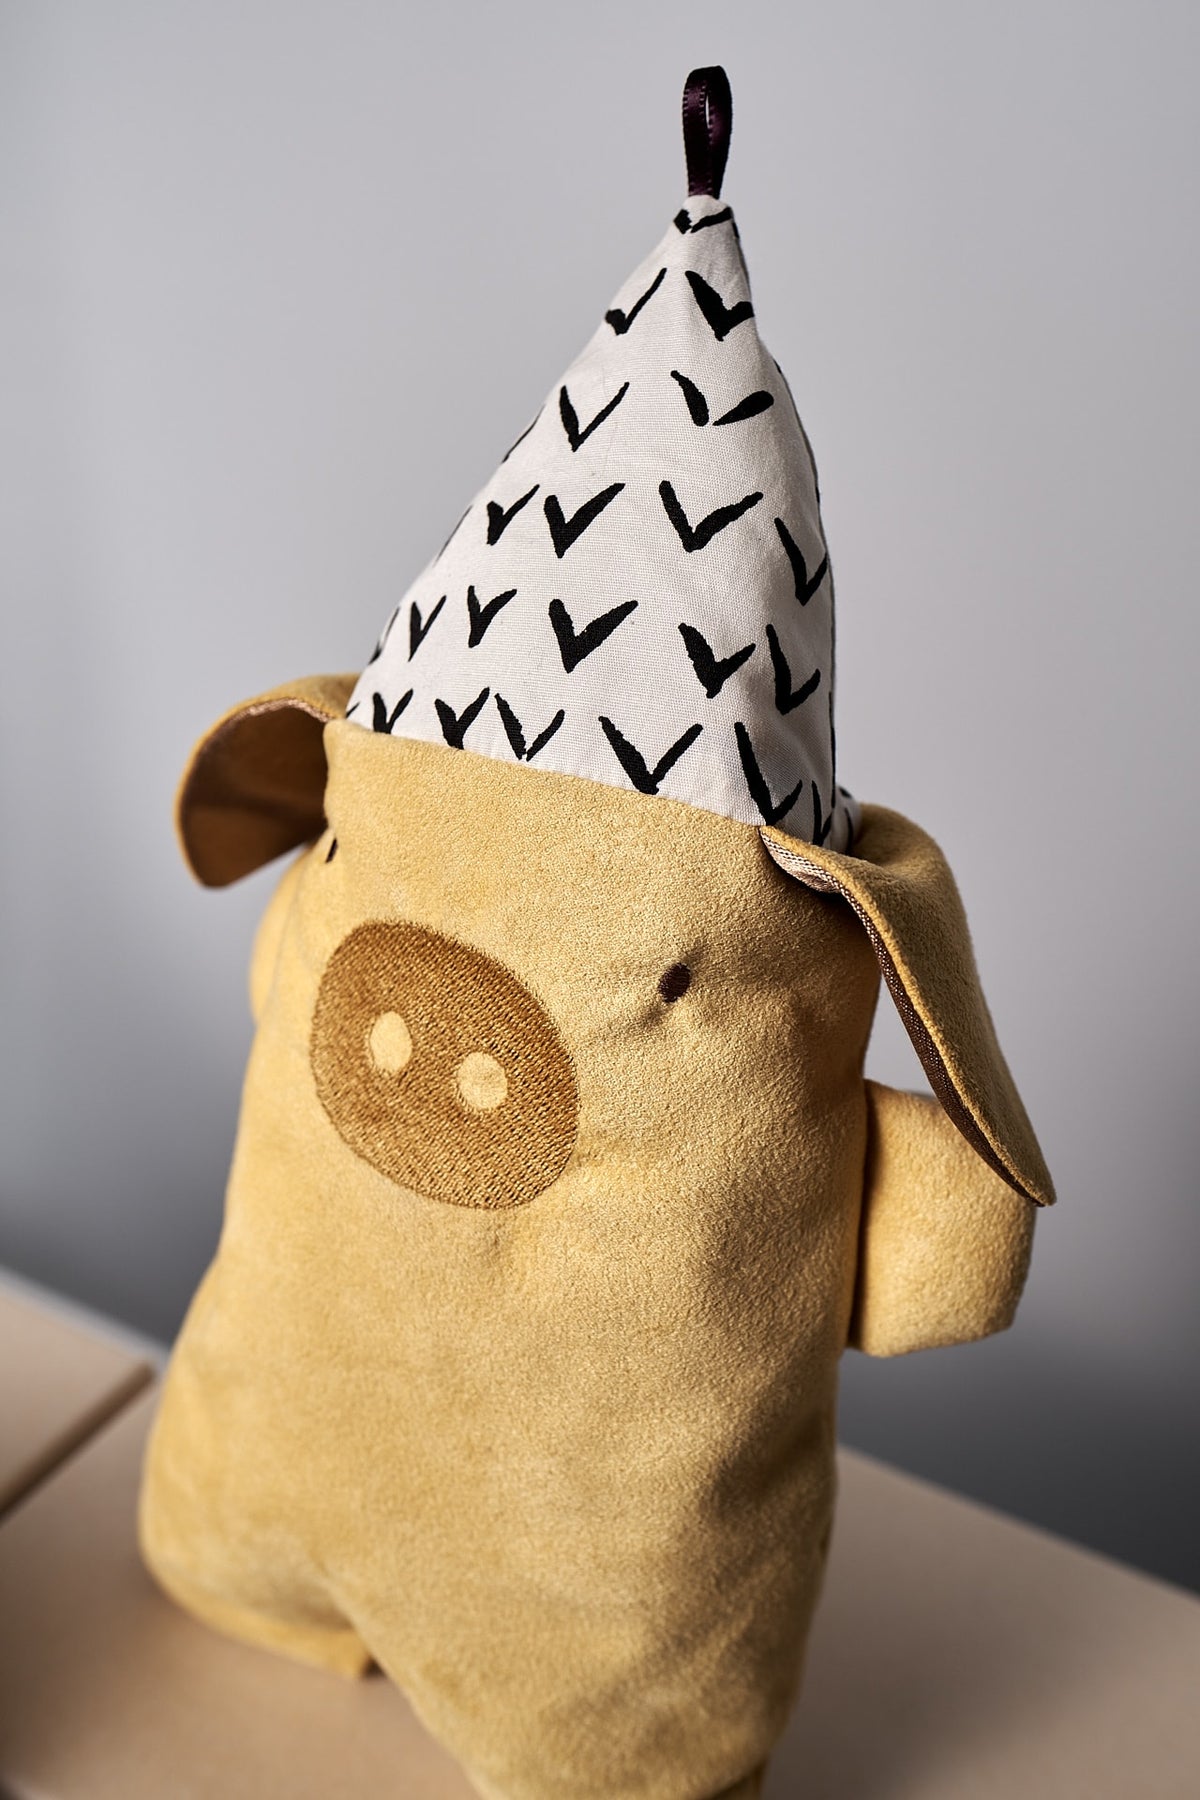 A Yali le Cochon stuffed animal with a hat by Raplapla.